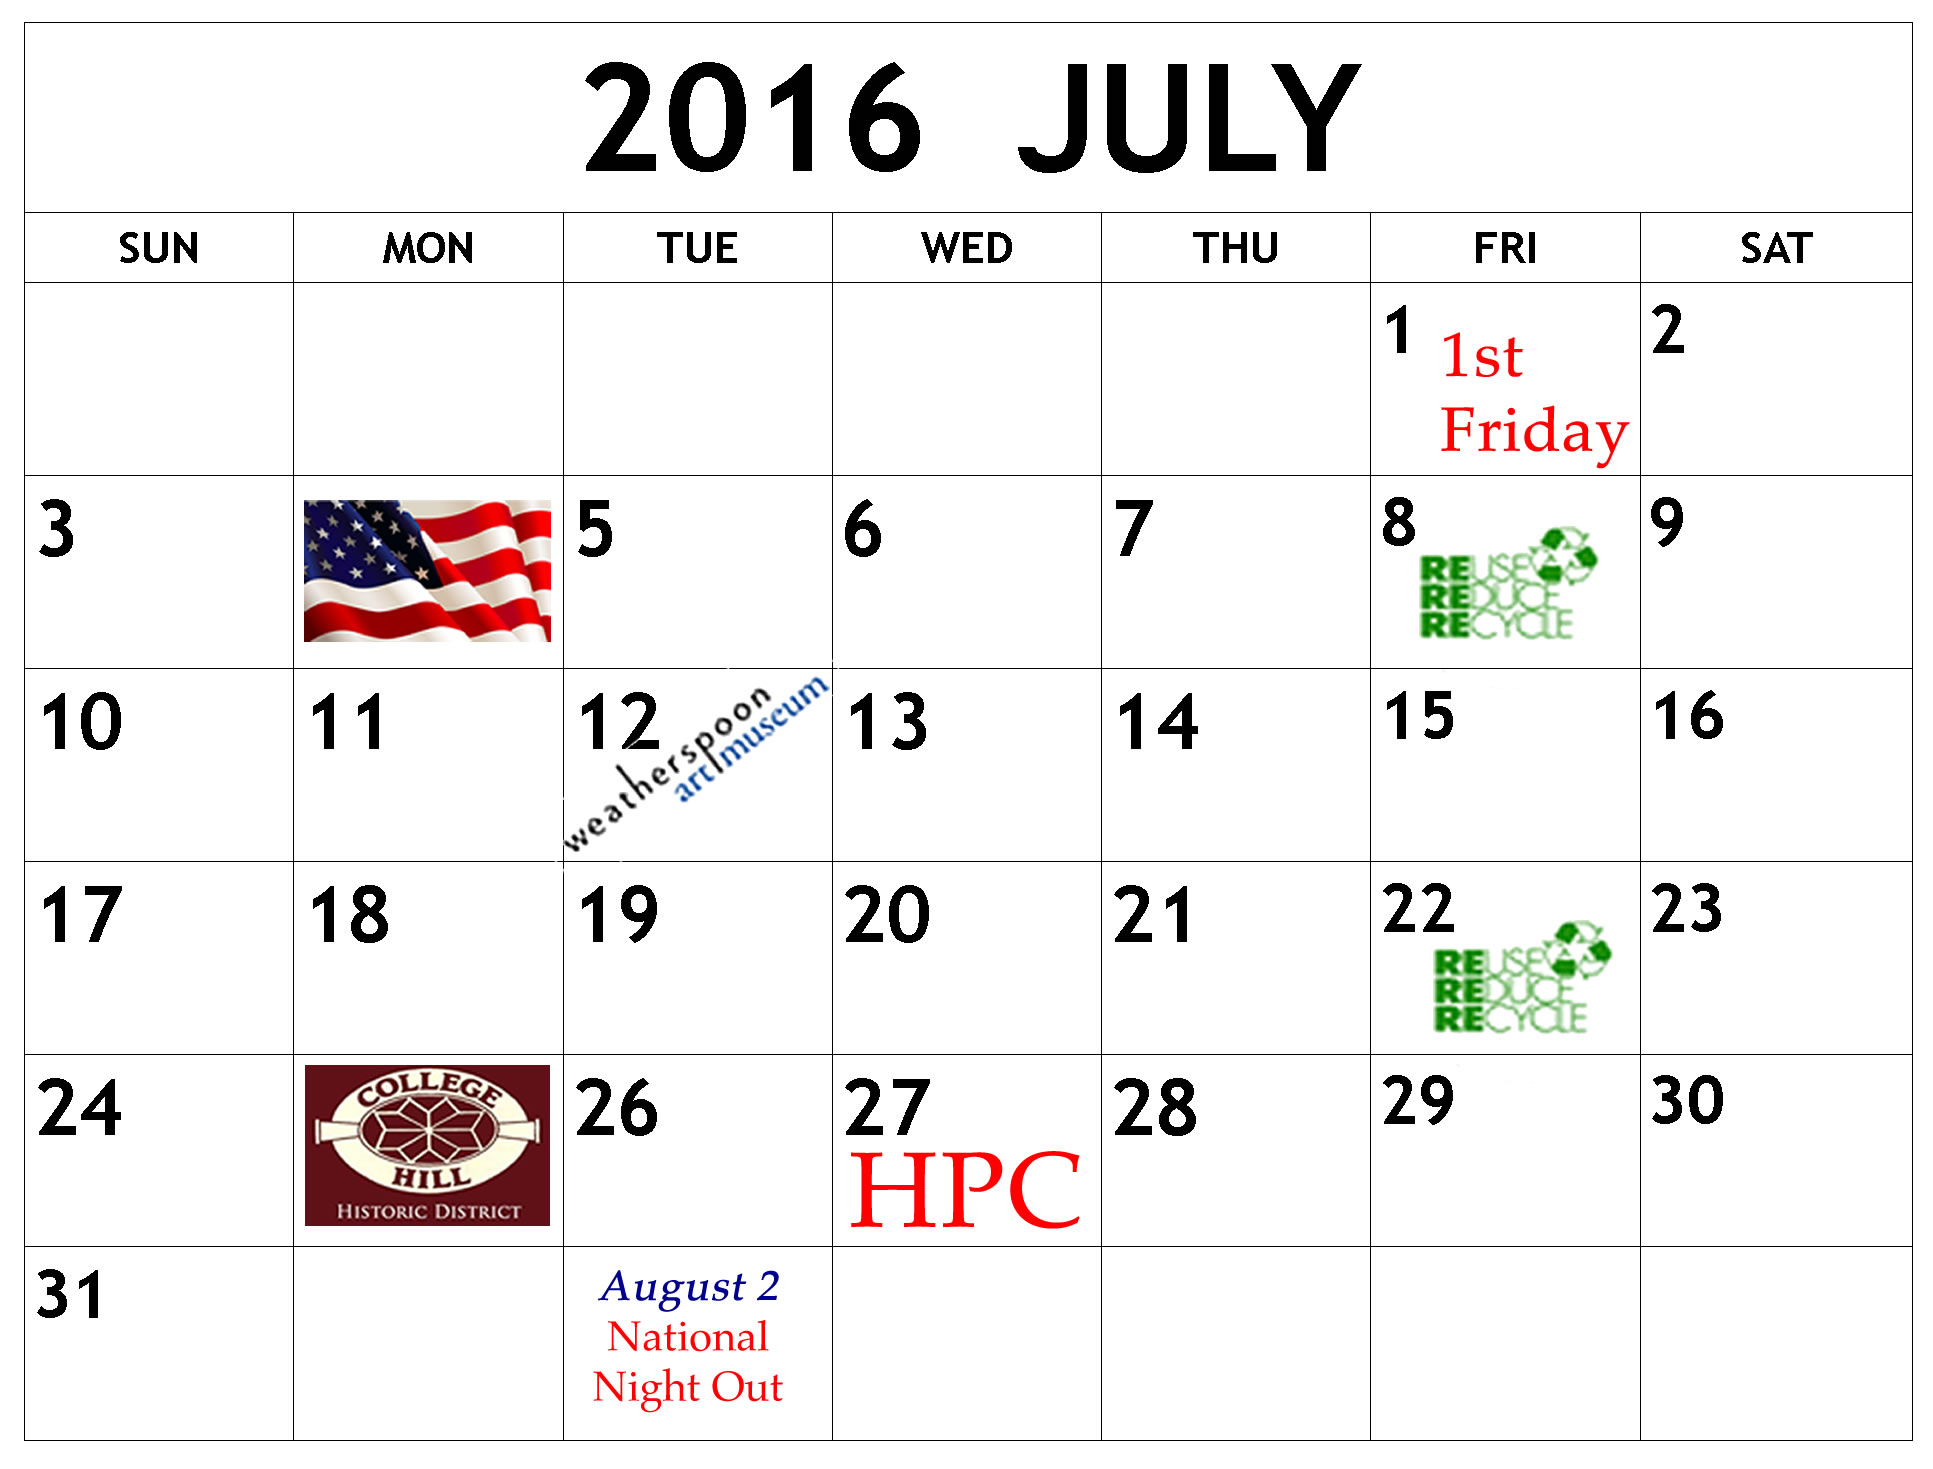 July calendar with College Hill events noted